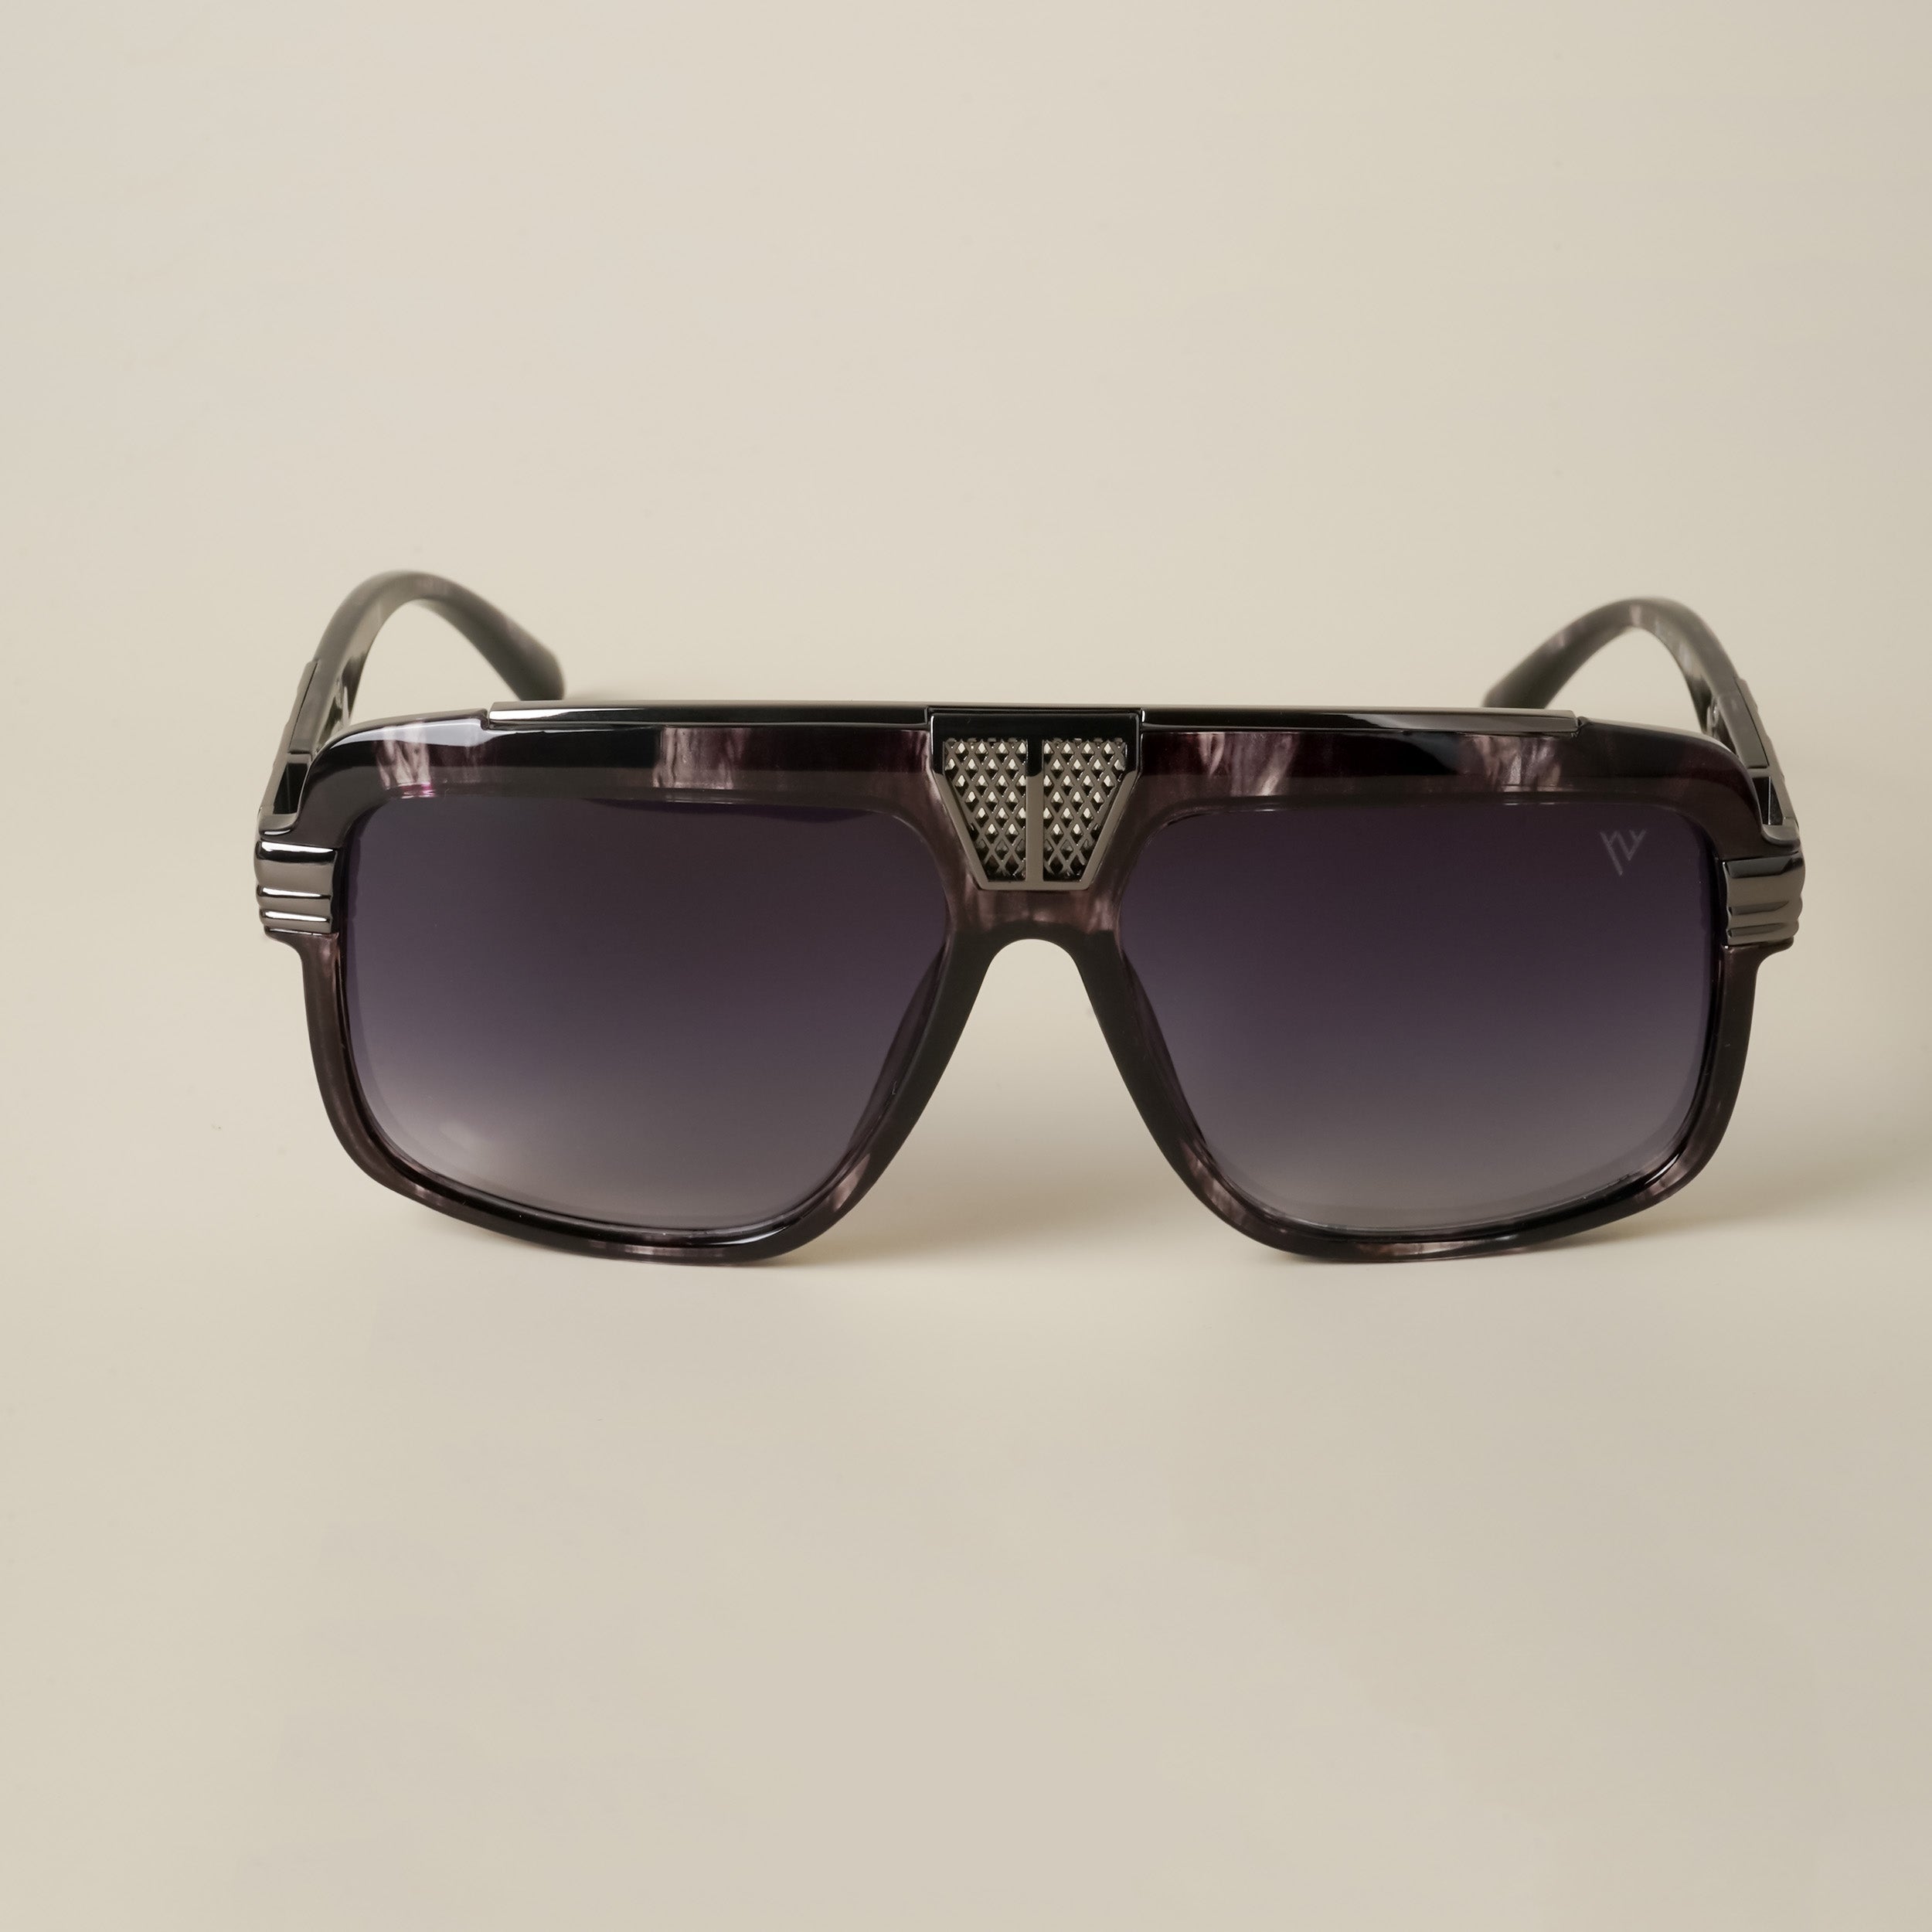 Voyage Grey Over Size Sunglasses for Women (3933MG4729)